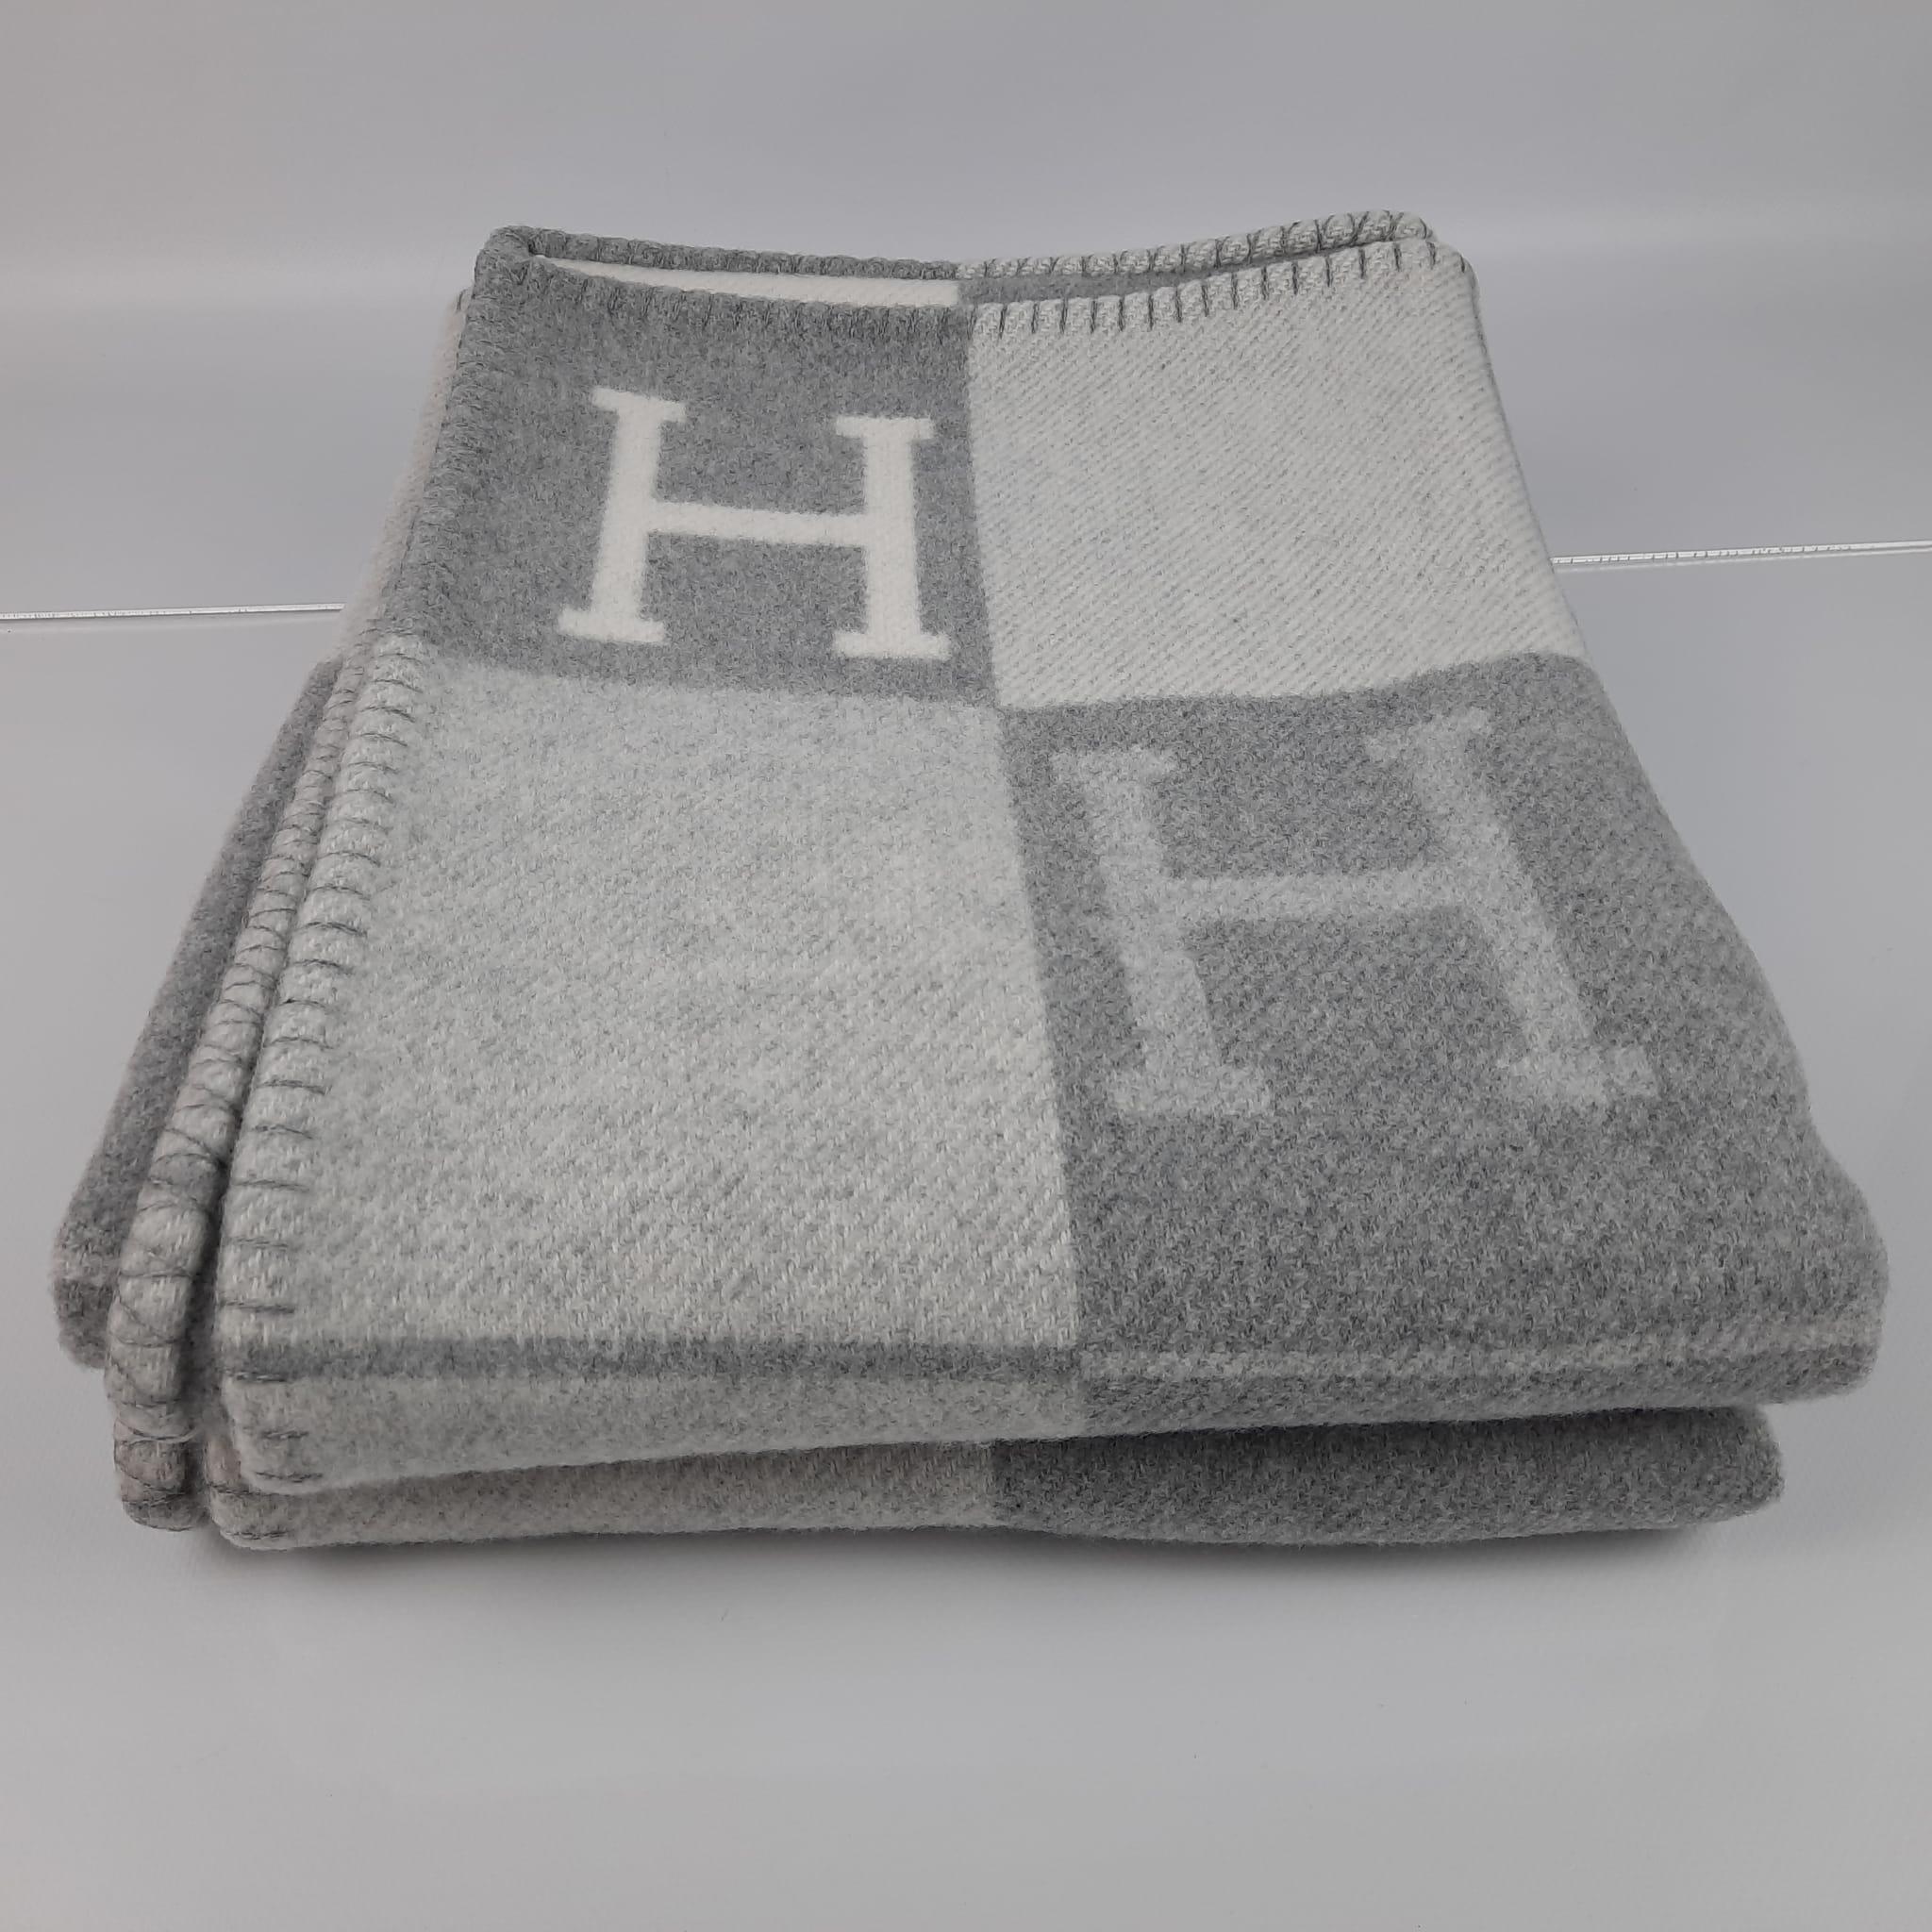 Hermes Écru / Gris Clair Avalon III throw blanket In New Condition For Sale In Nicosia, CY